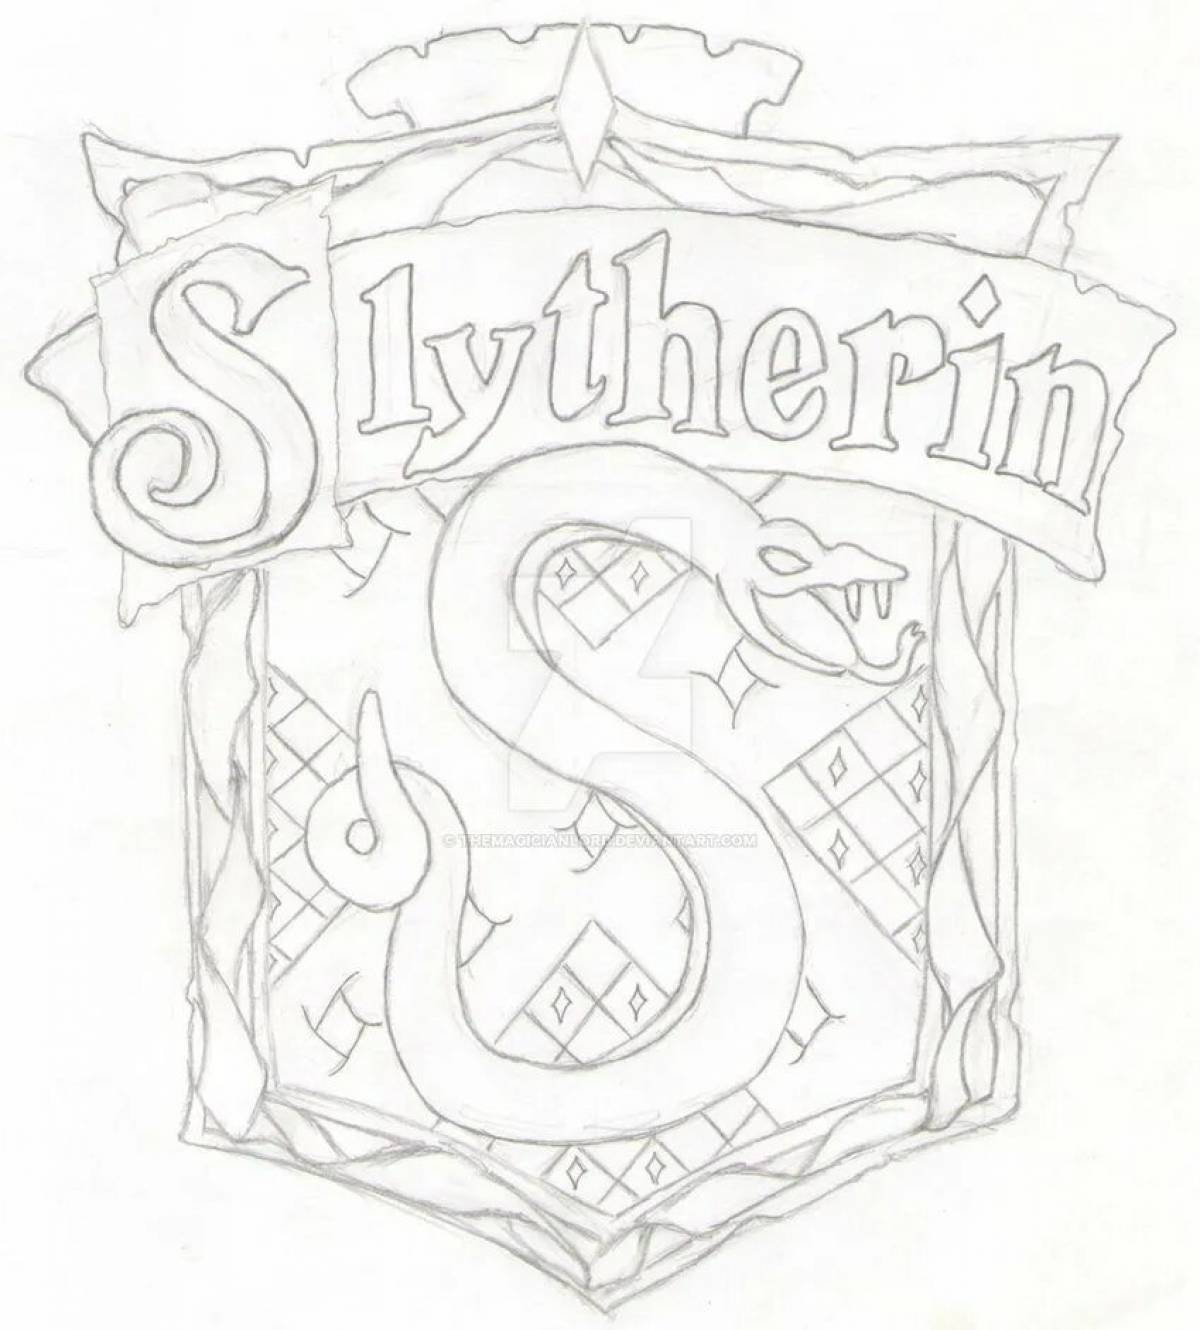 Slytherin coat of arms #10